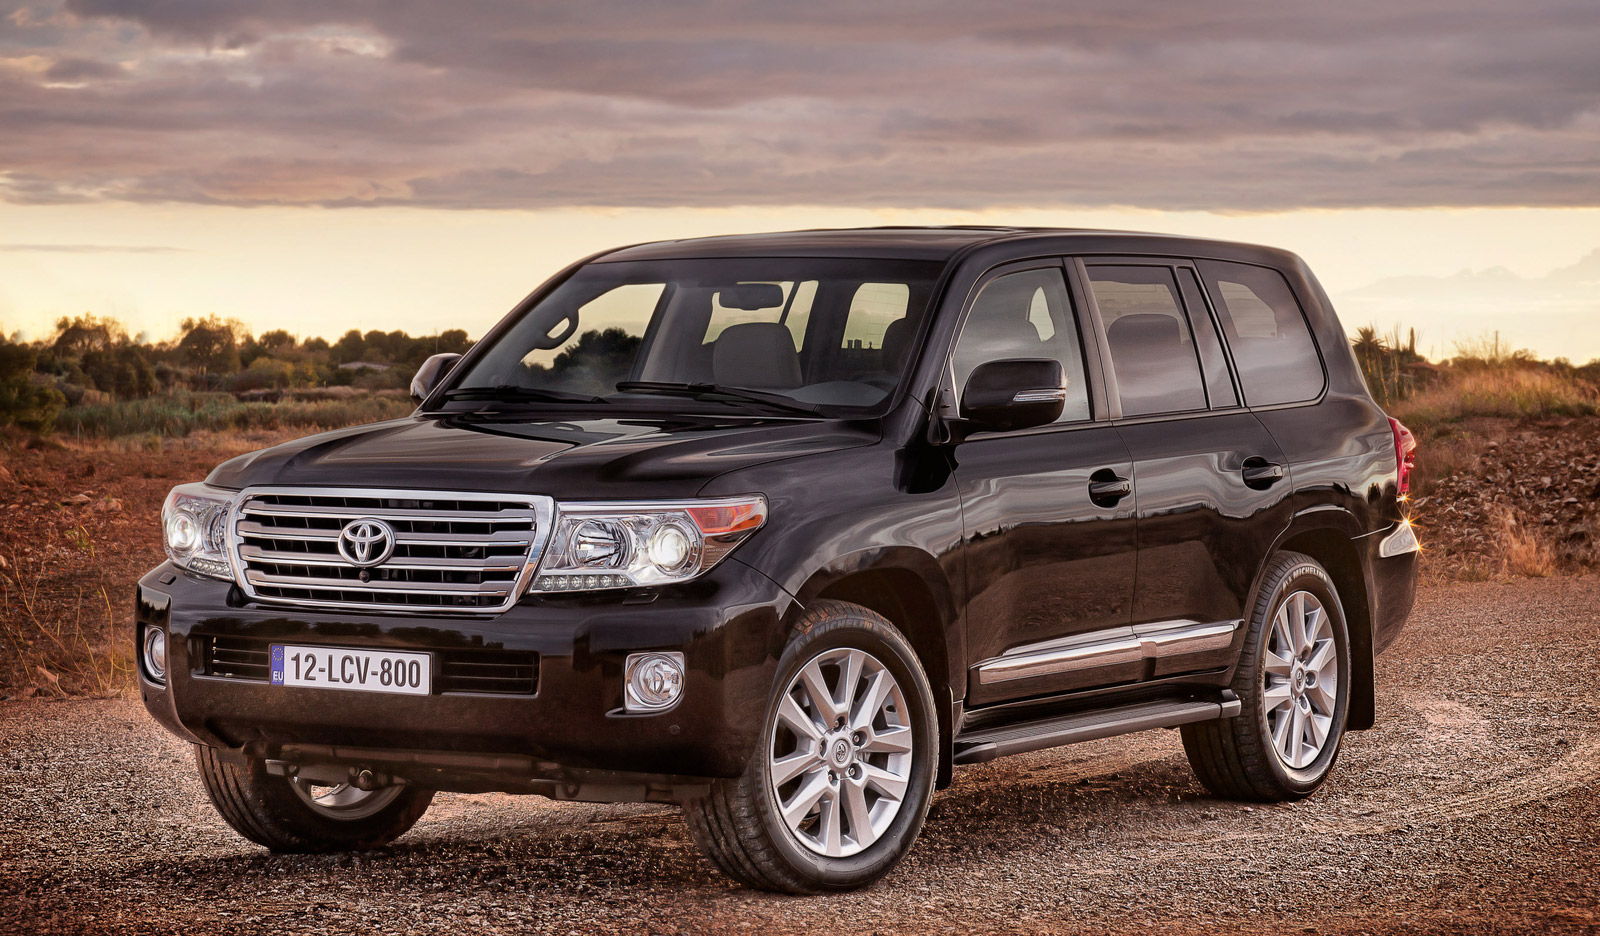 2013 Toyota Land Cruiser Preview